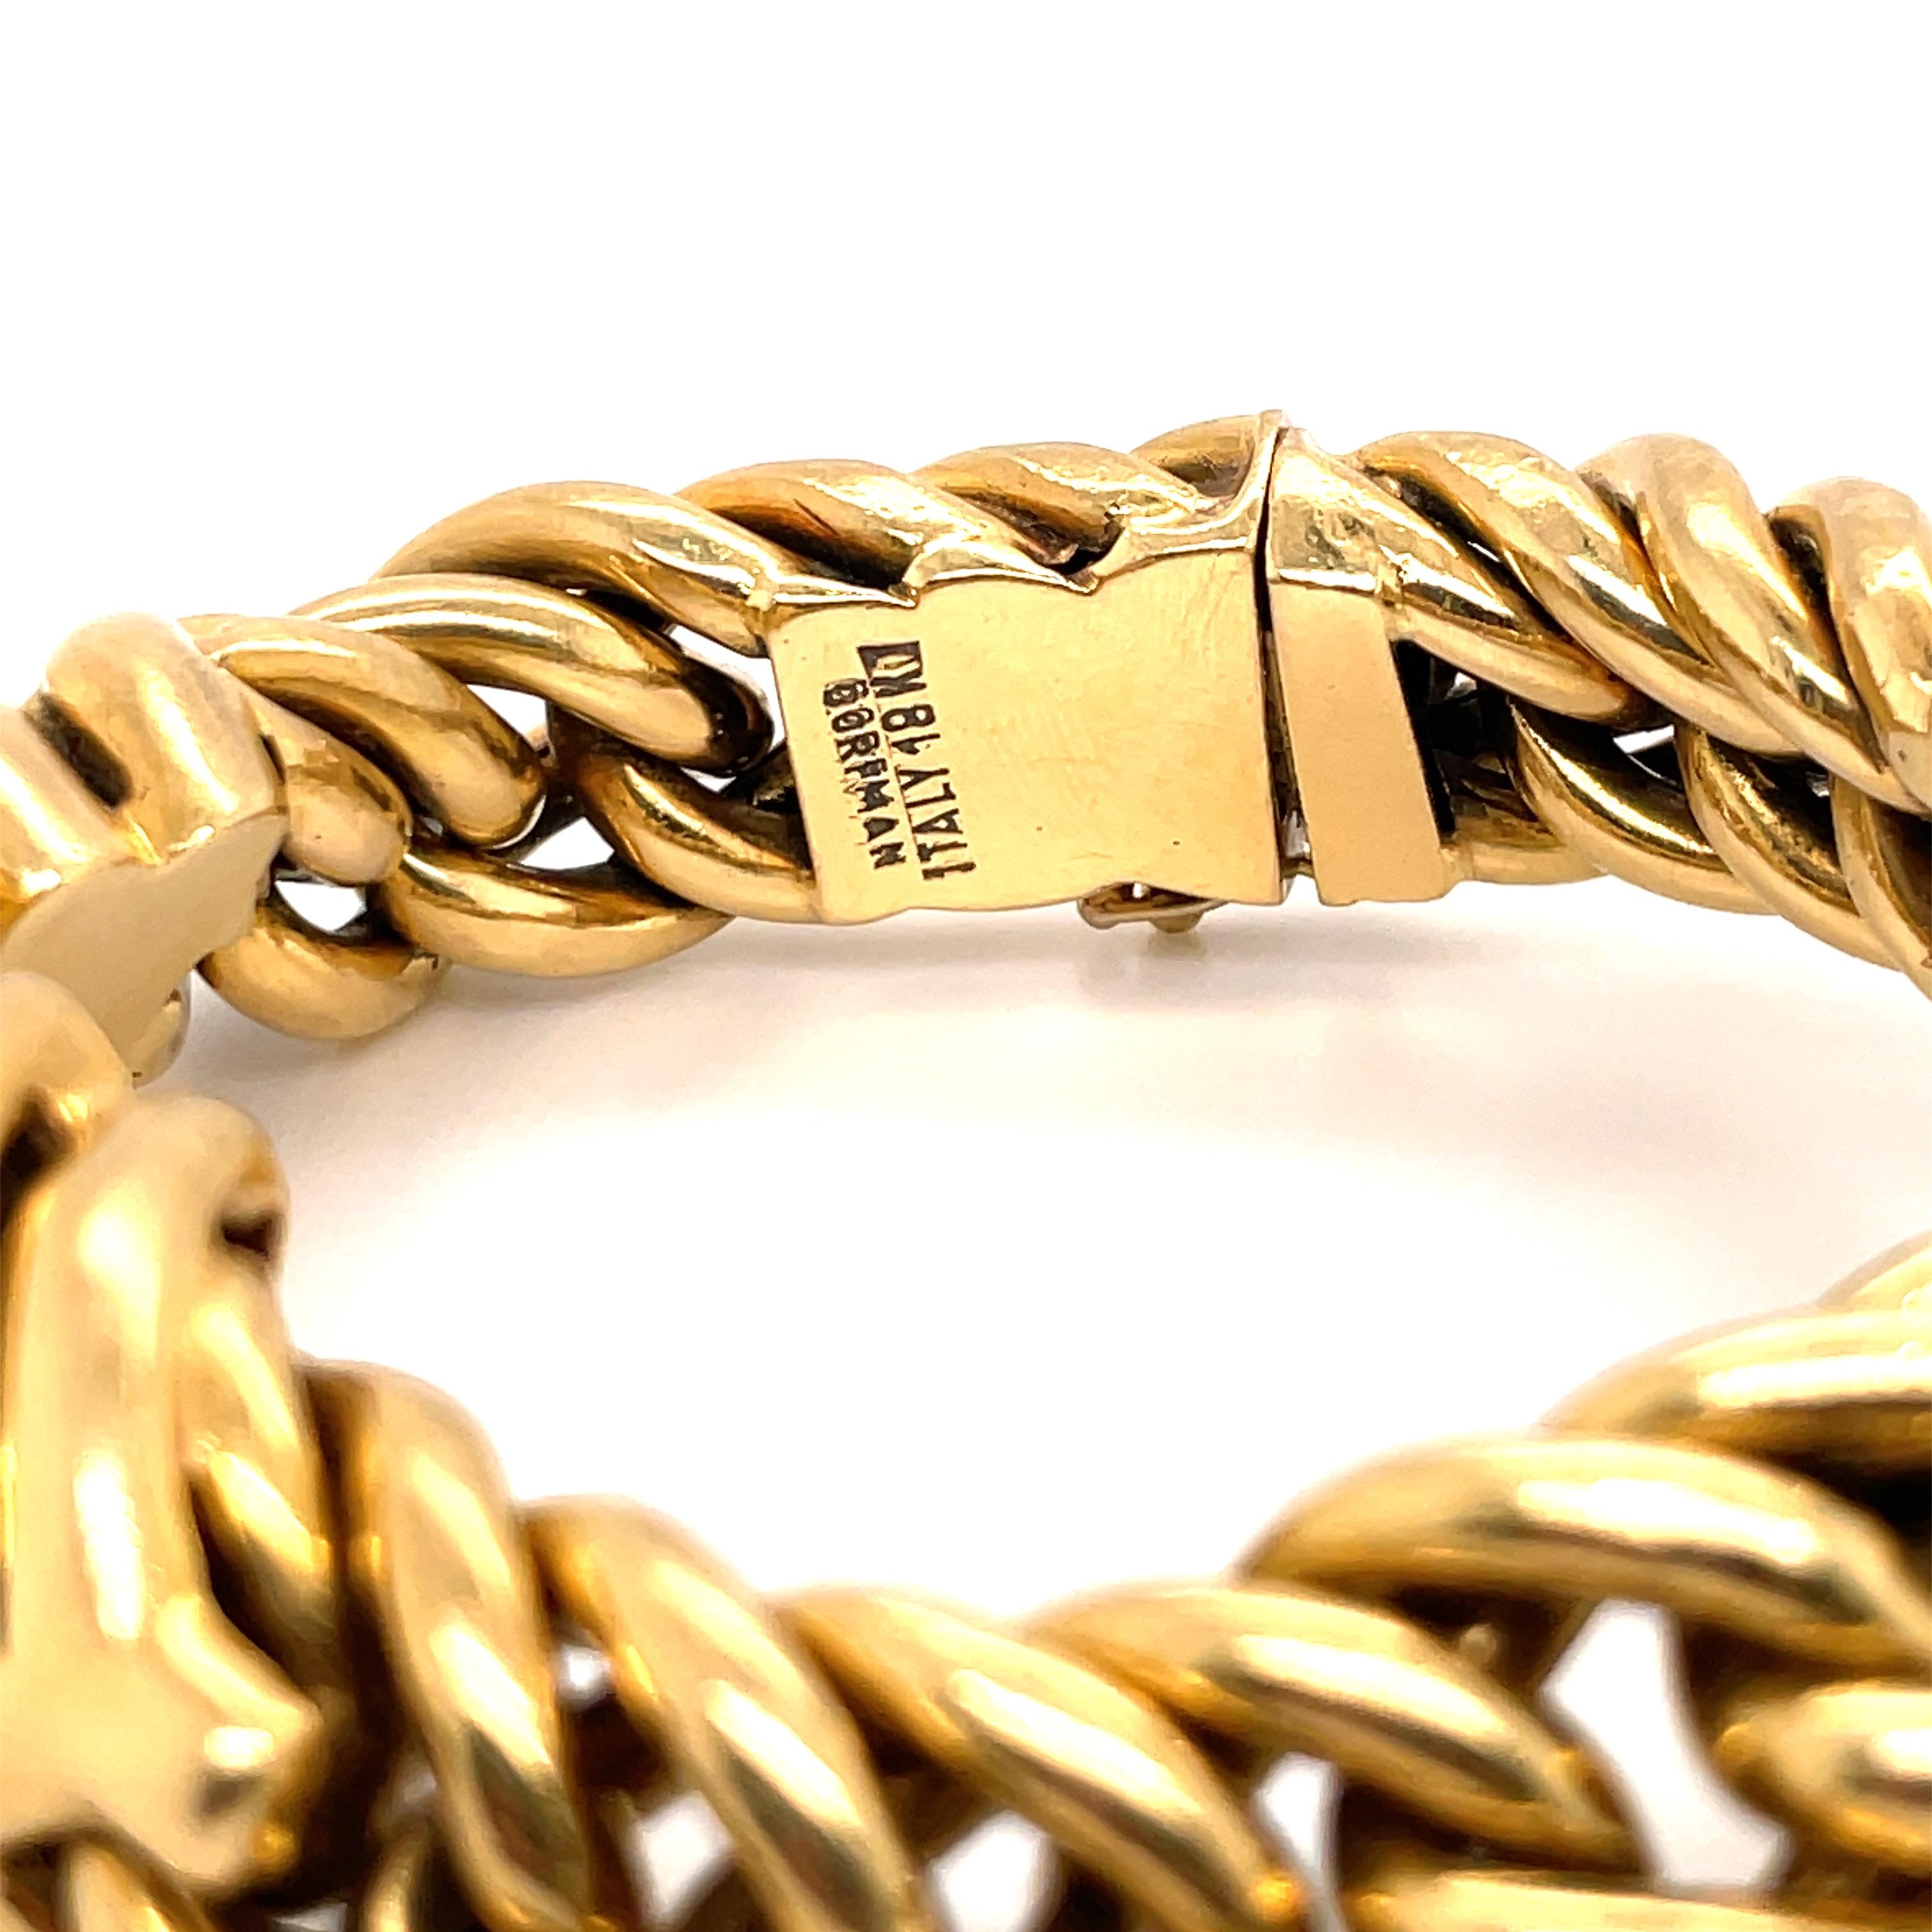 Contemporary Dorfman 18 Karat Yellow Gold Link Bracelet 78.6 Grams Made in Italy For Sale